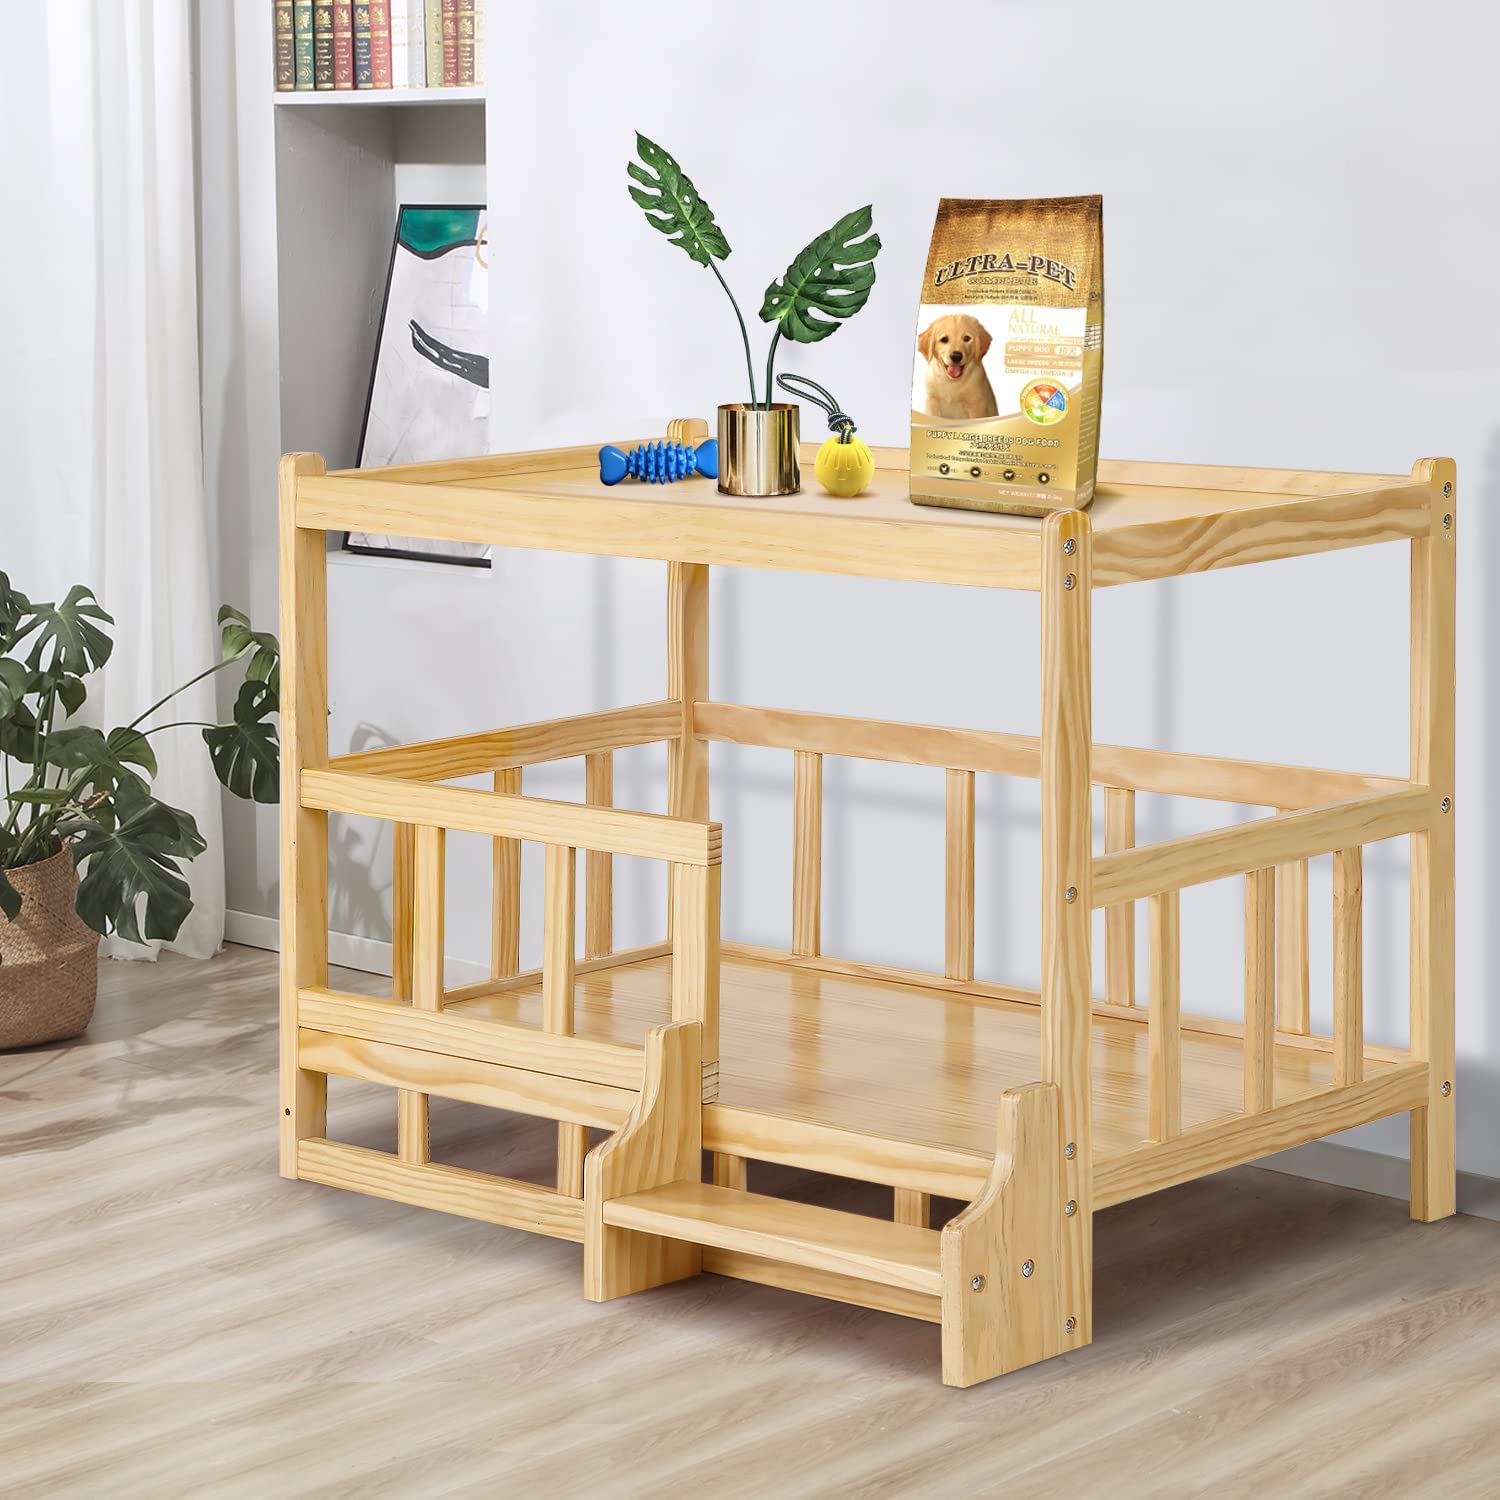 Wooden Dog Bed Frame, Stand, Perfect for Large/Extra-Large Dogs, Easy to Clean The Pimp Your Pets Store